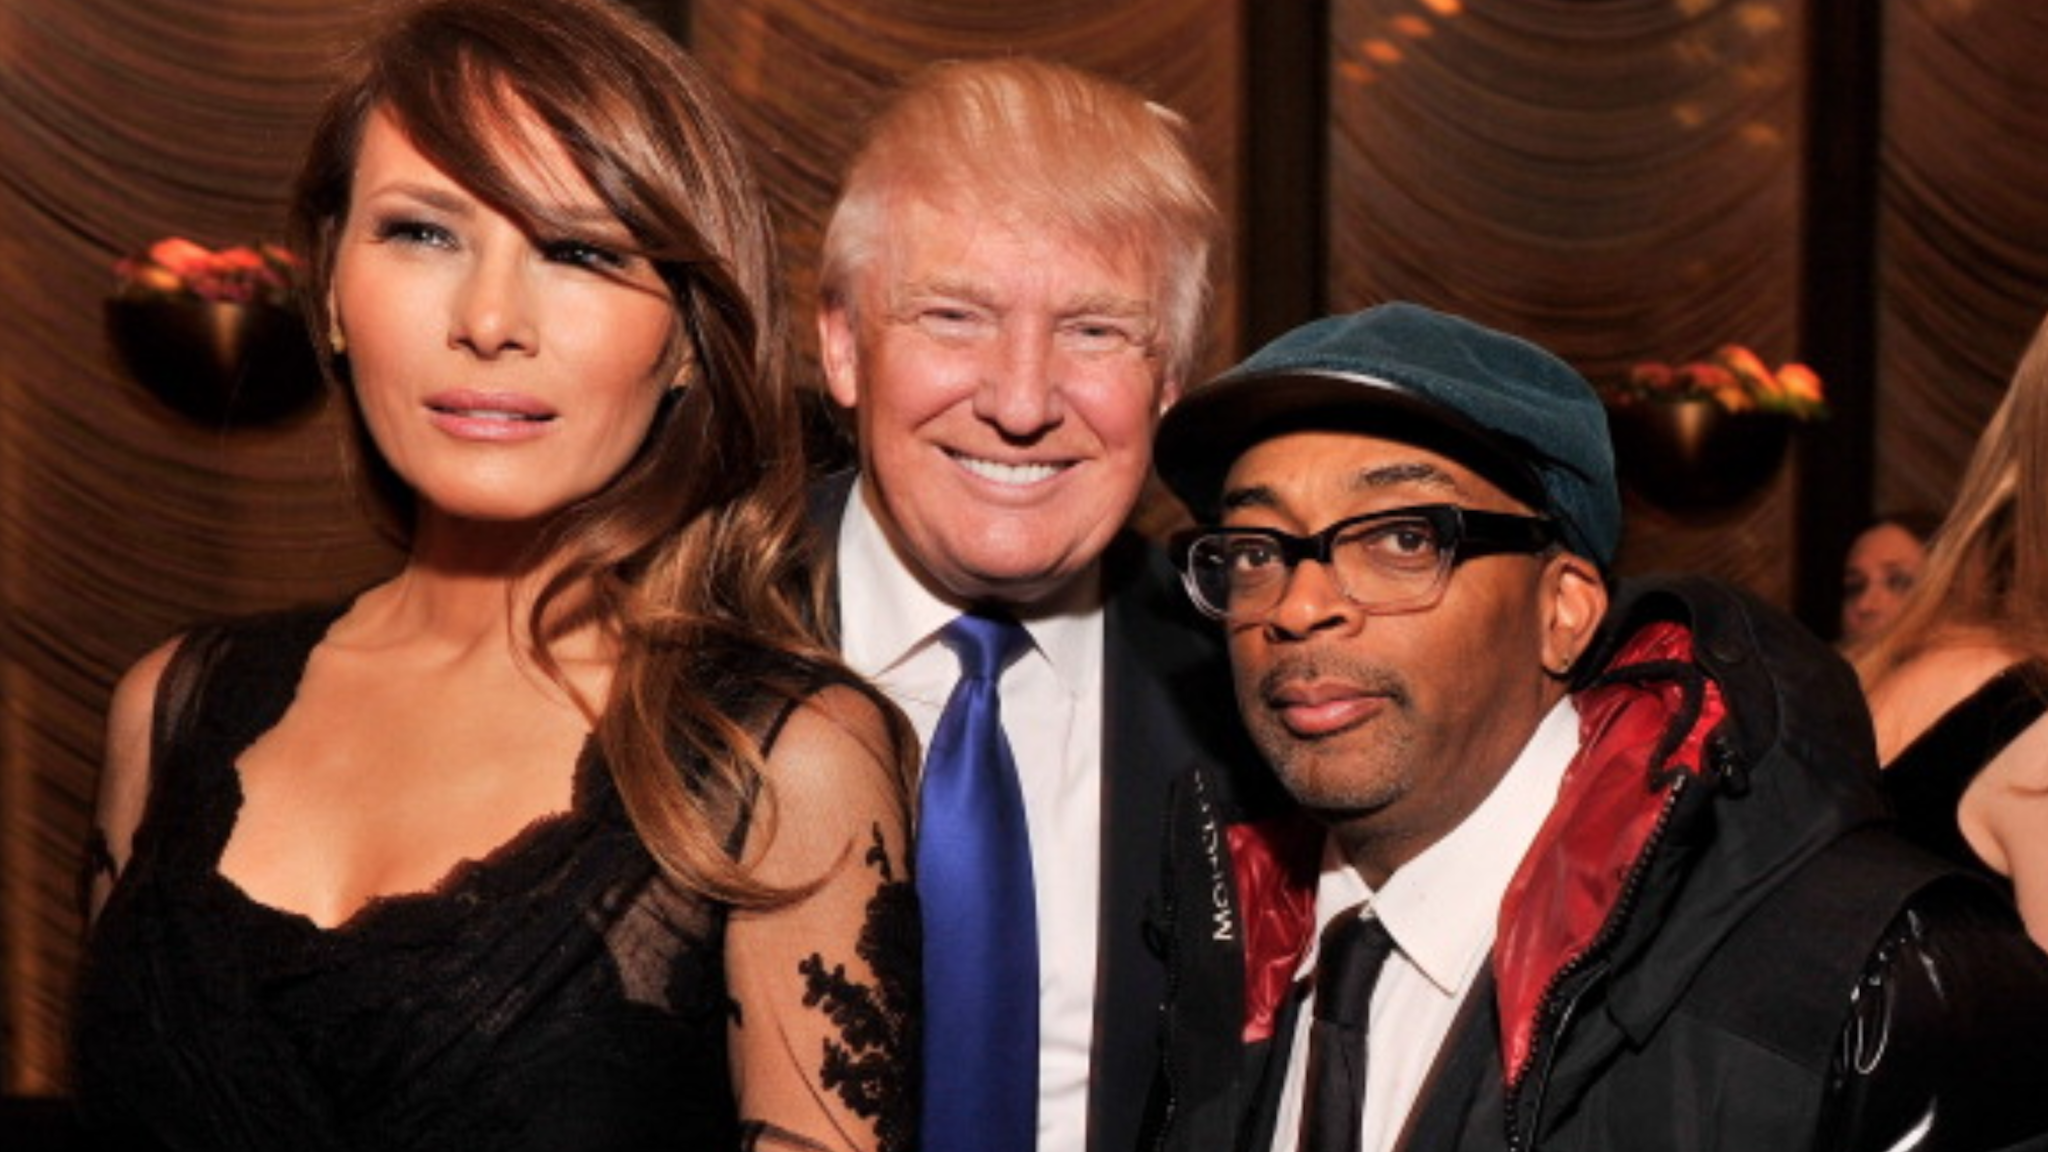 NEW YORK, NY - MARCH 14: Melania Trump, businessman/TV personality Donald Trump, and filmmaker Spike Lee attend The New York Observer 25th Anniversary Party at Four Seasons Restaurant on March 14, 2013 in New York City.